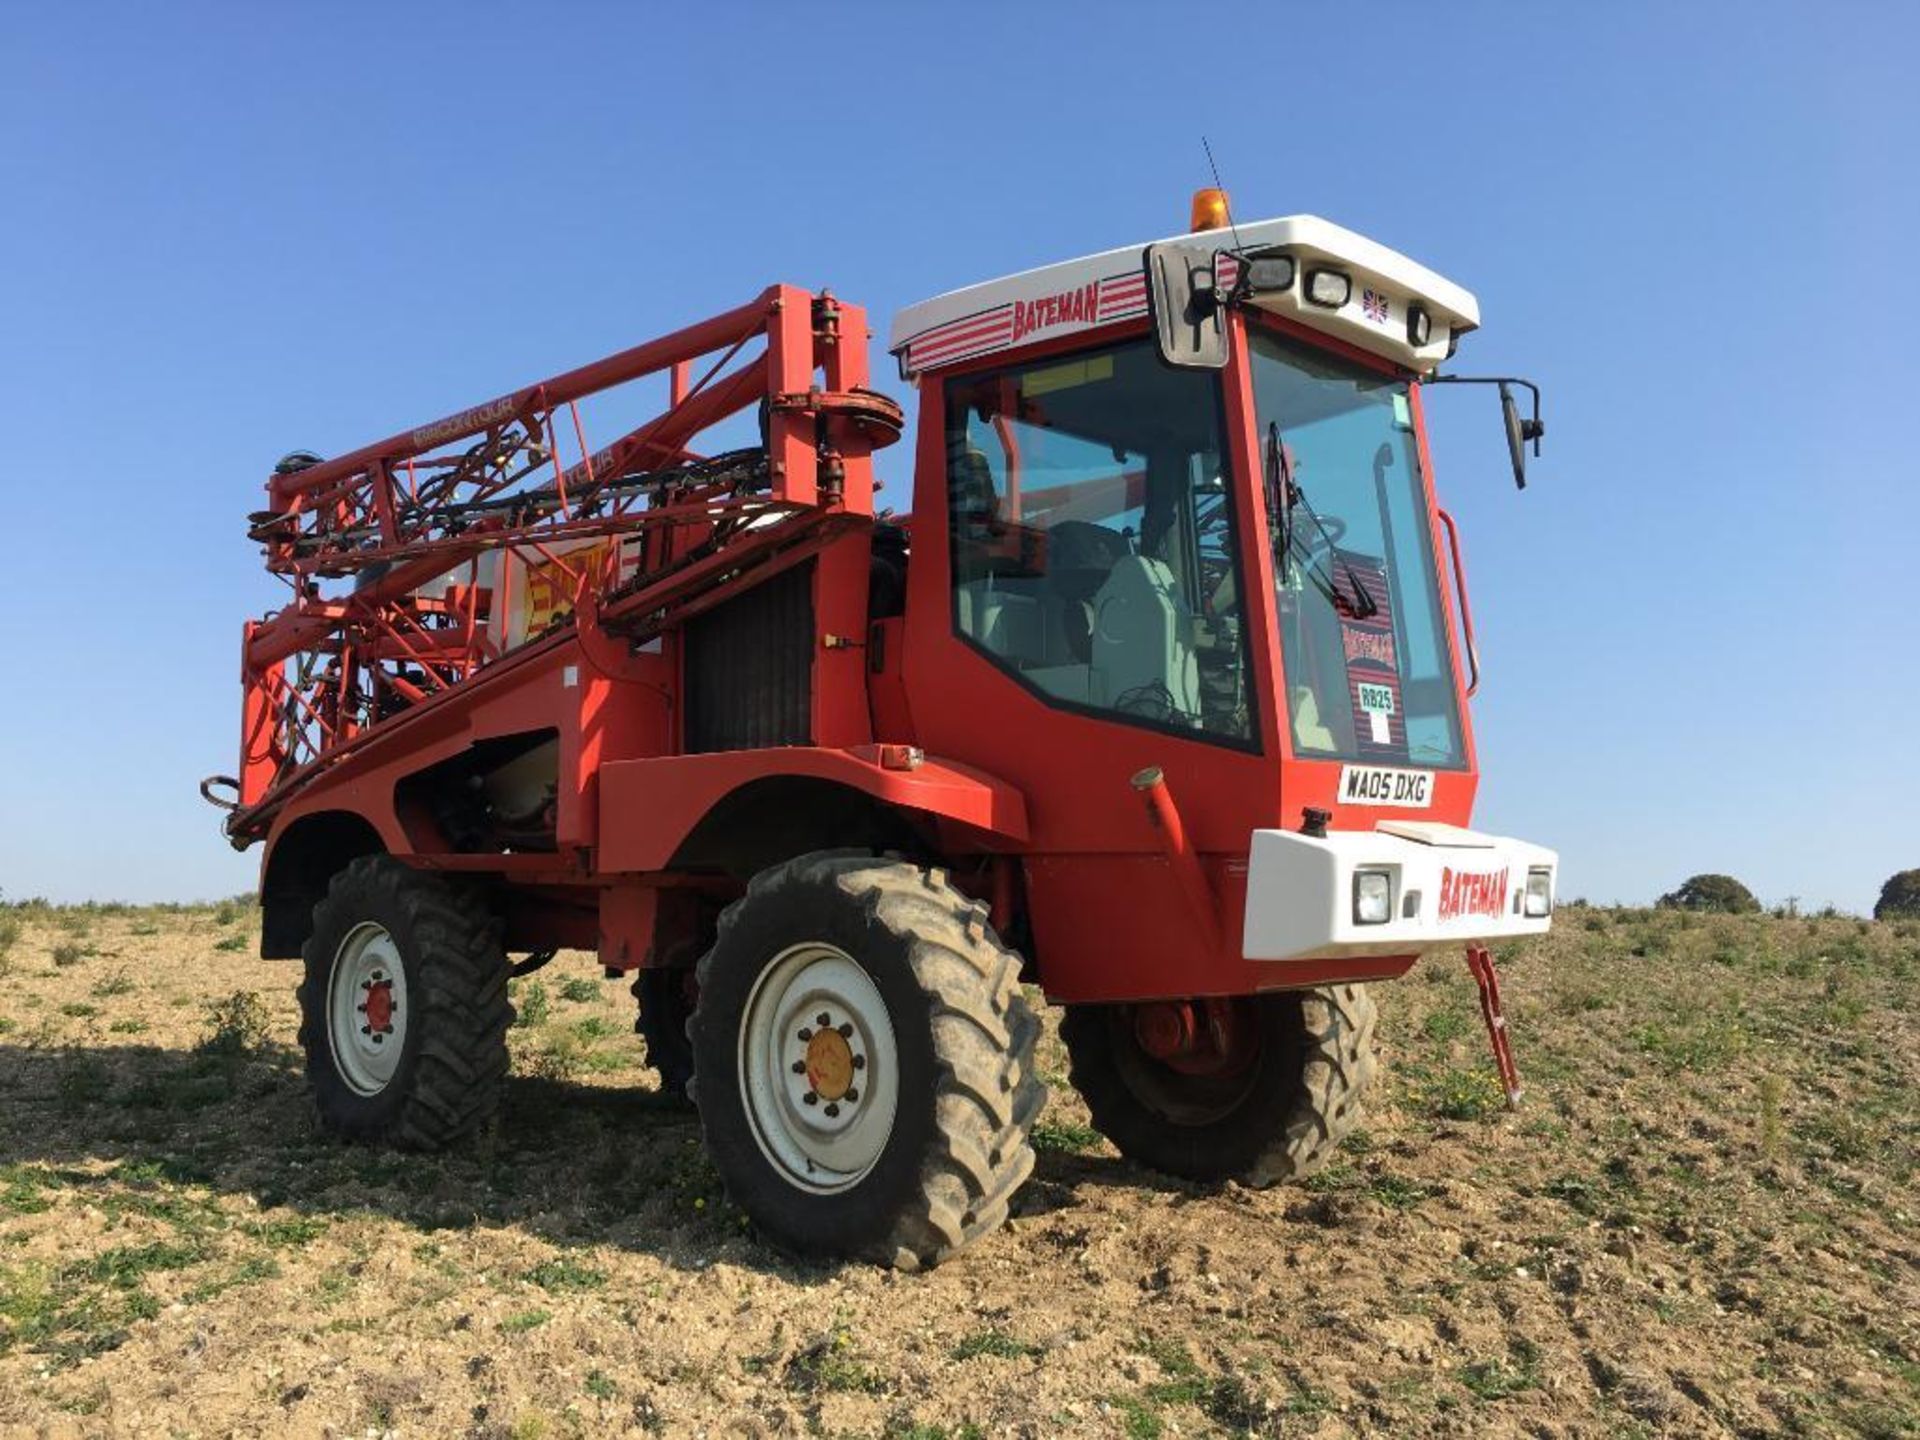 2005 Bateman RB25 24m self-propelled sprayer with 3000L tank, VG booms, triple nozzle bodies on 380/ - Image 11 of 16